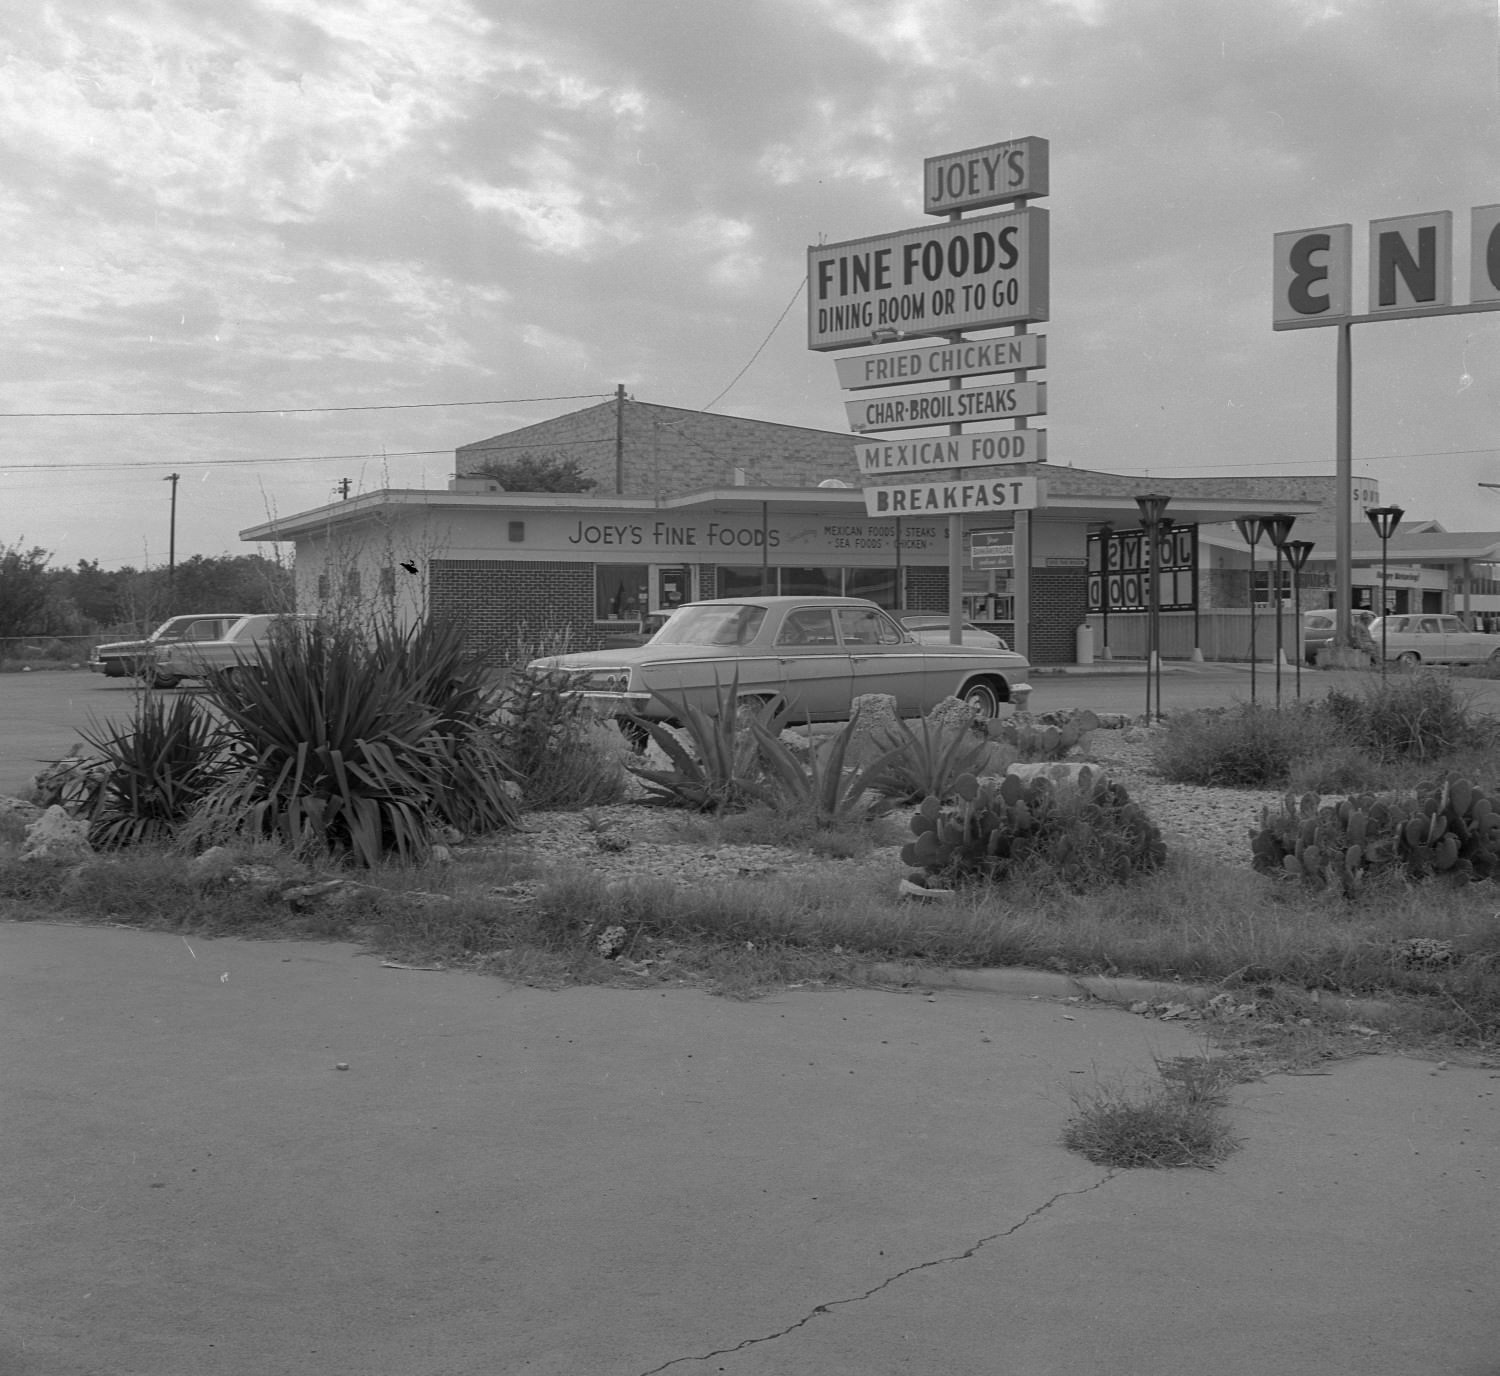 Joey's Fine Foods restaurant at 1411 W. Ben White Blvd. There are cacti in the foreground. Demolished, 1969